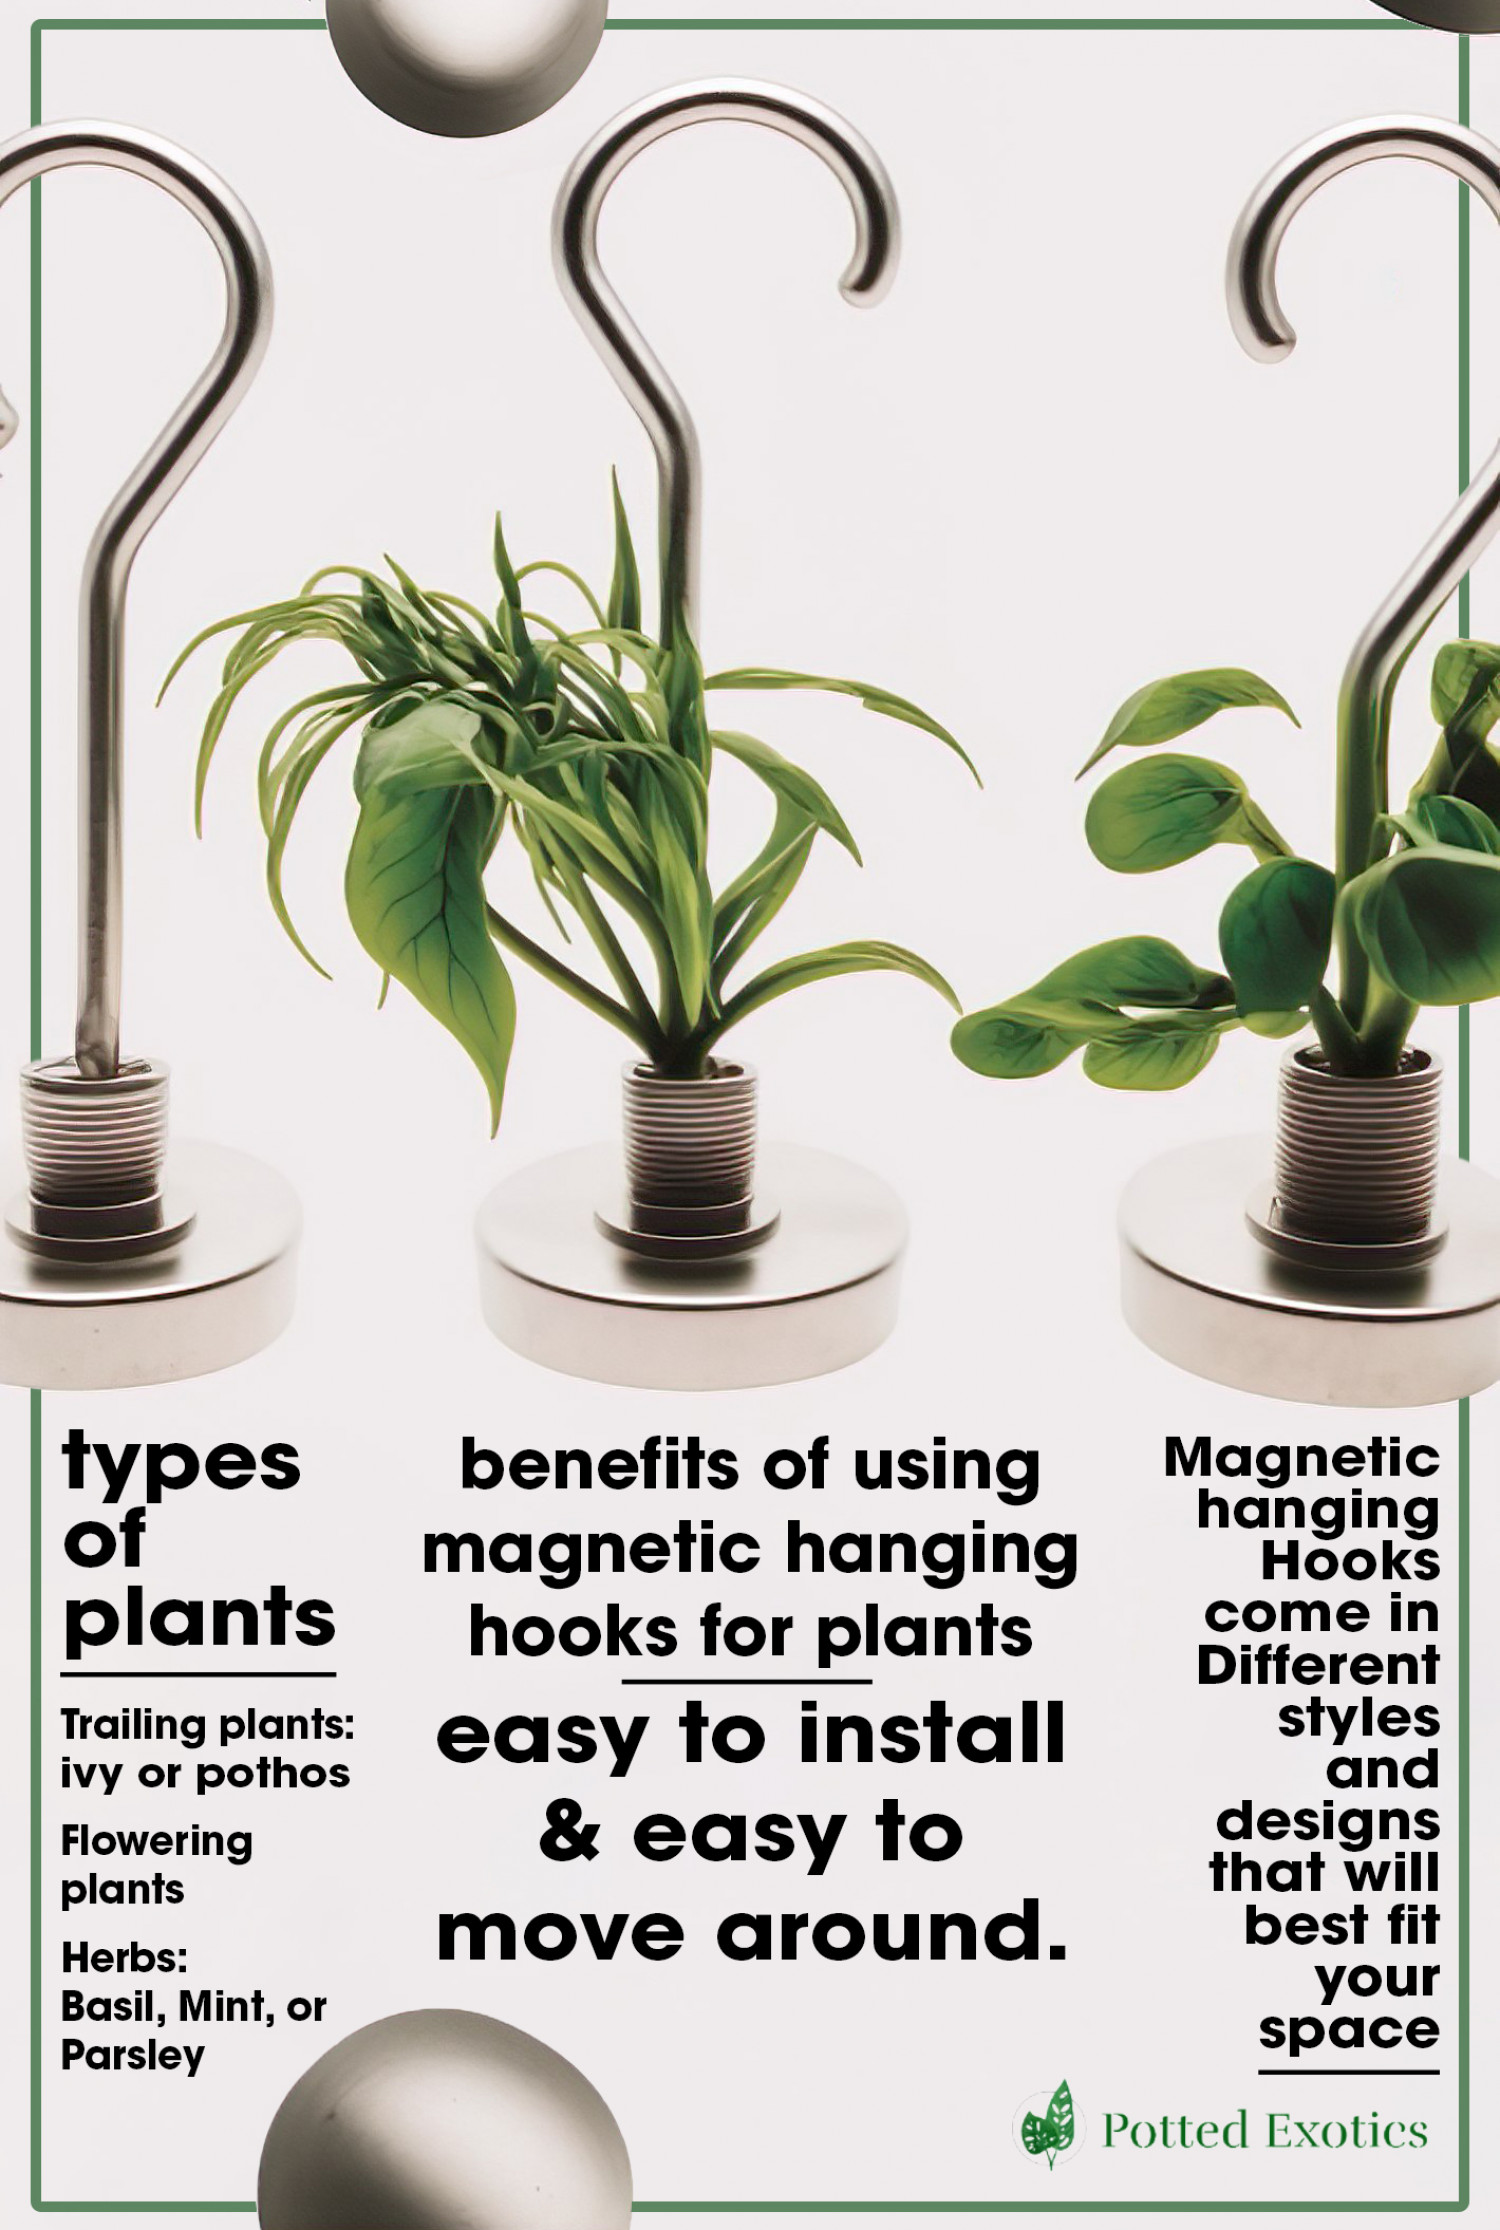 Hanging Hooks for plants Infographic